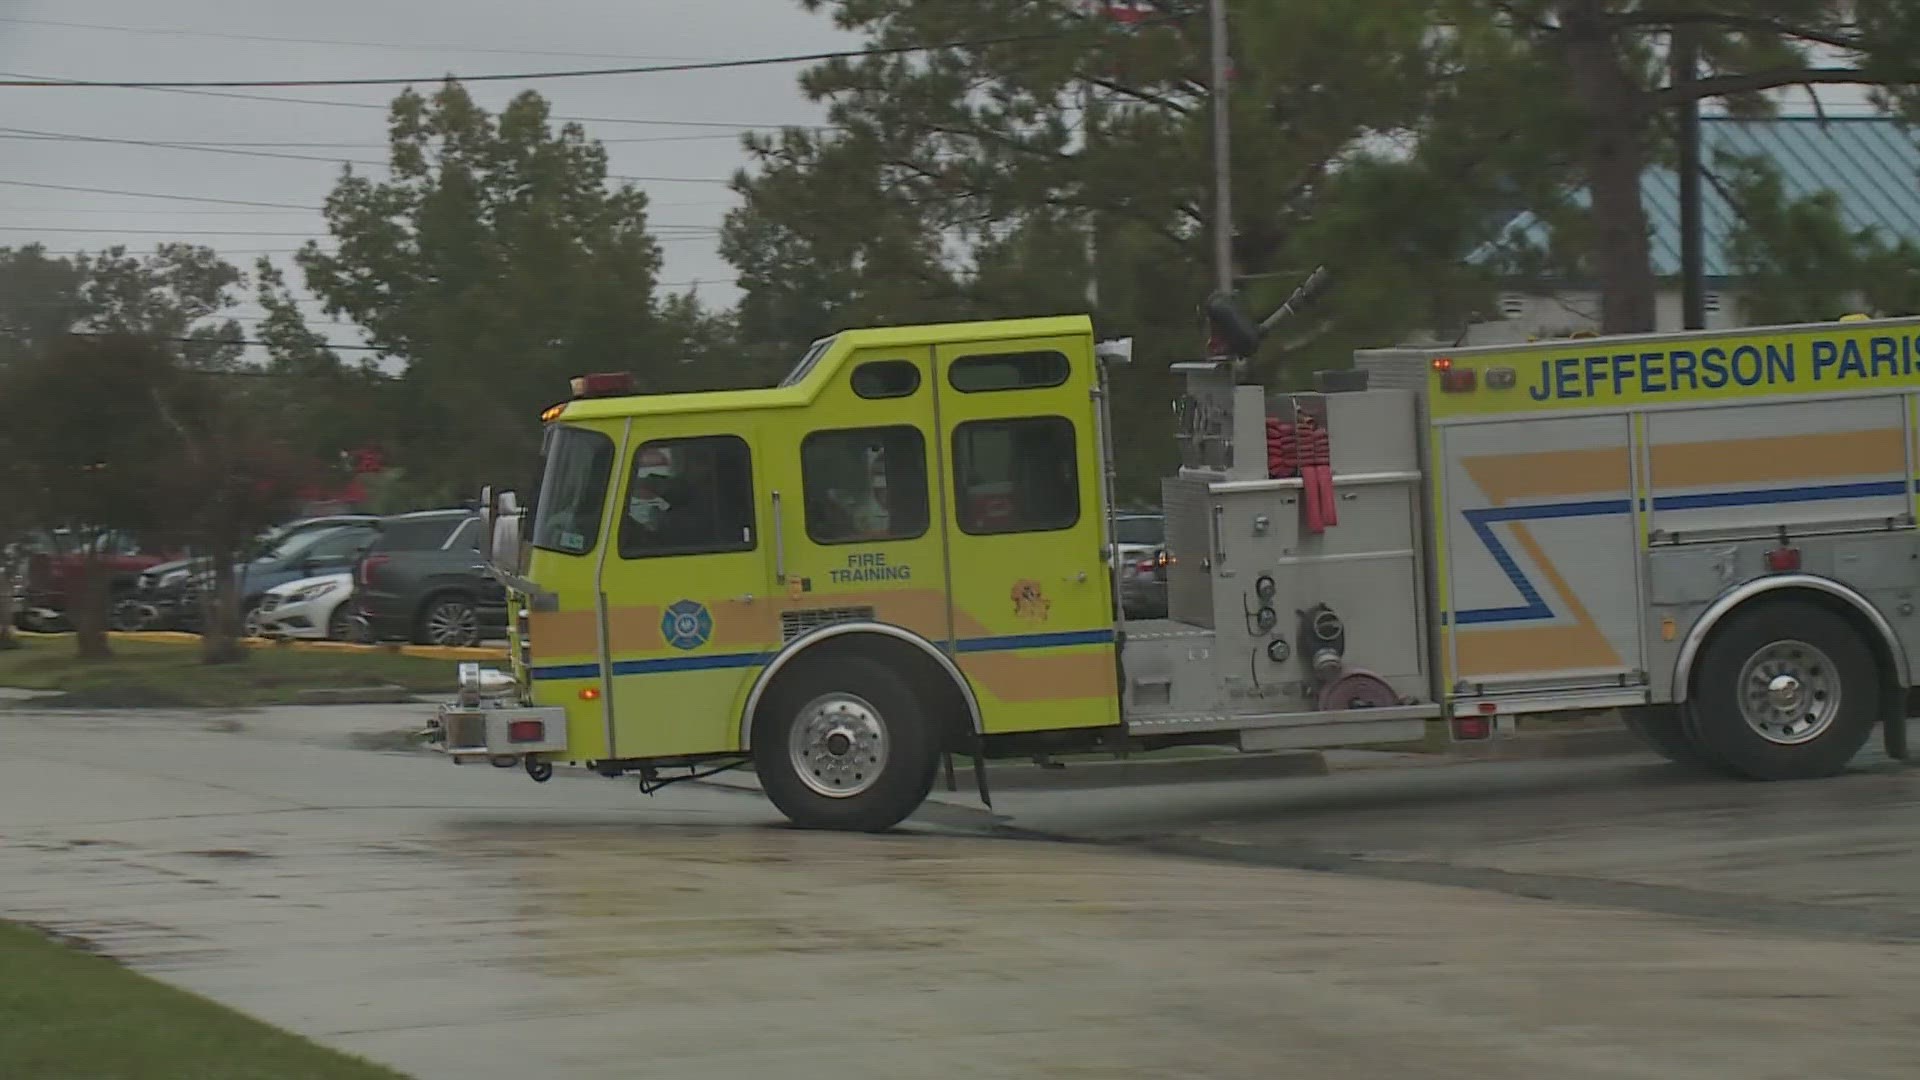 The Kenner Fire Department said it has deteriorating equipment and that members haven't had a raise in years.